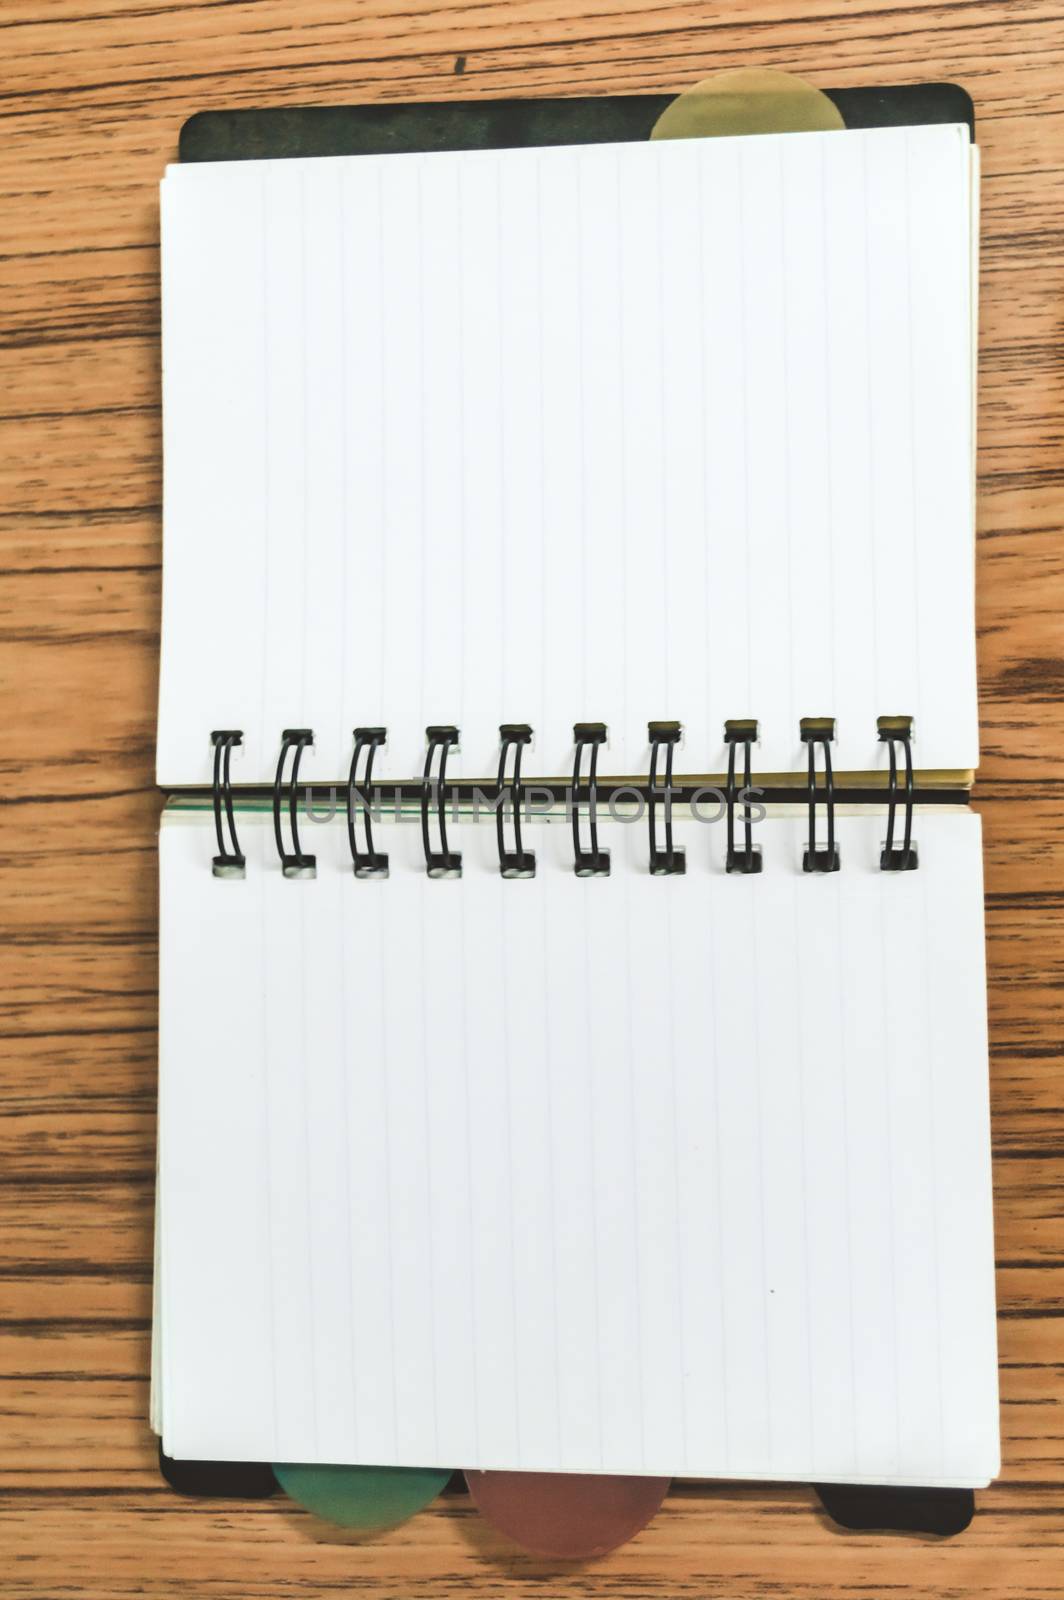 Blank empty notepad on a wood table. Top view image of open pocket planner notebook with empty pages ready for adding text or mockup. by sudiptabhowmick